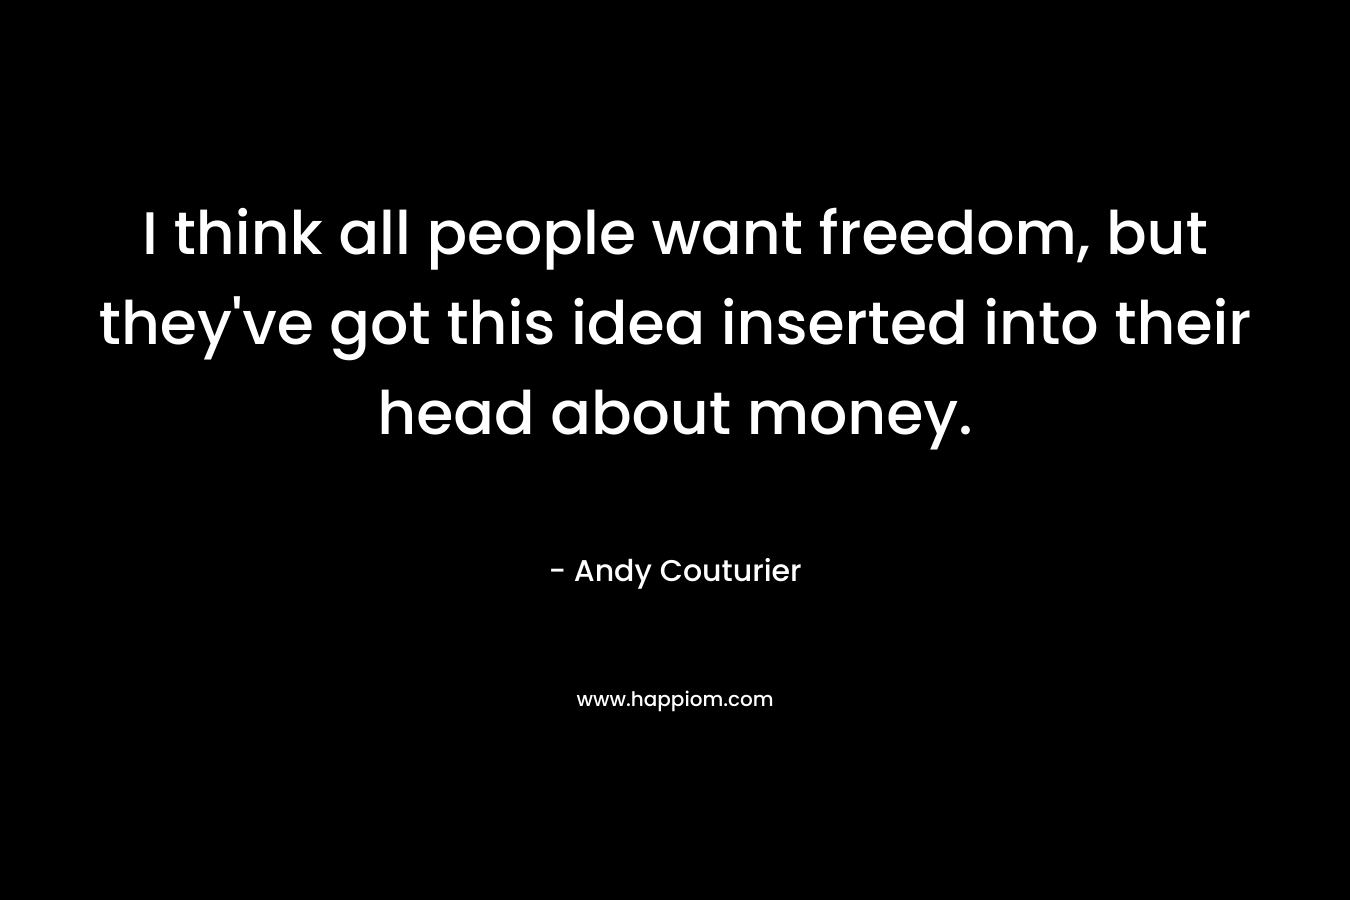 I think all people want freedom, but they’ve got this idea inserted into their head about money. – Andy Couturier